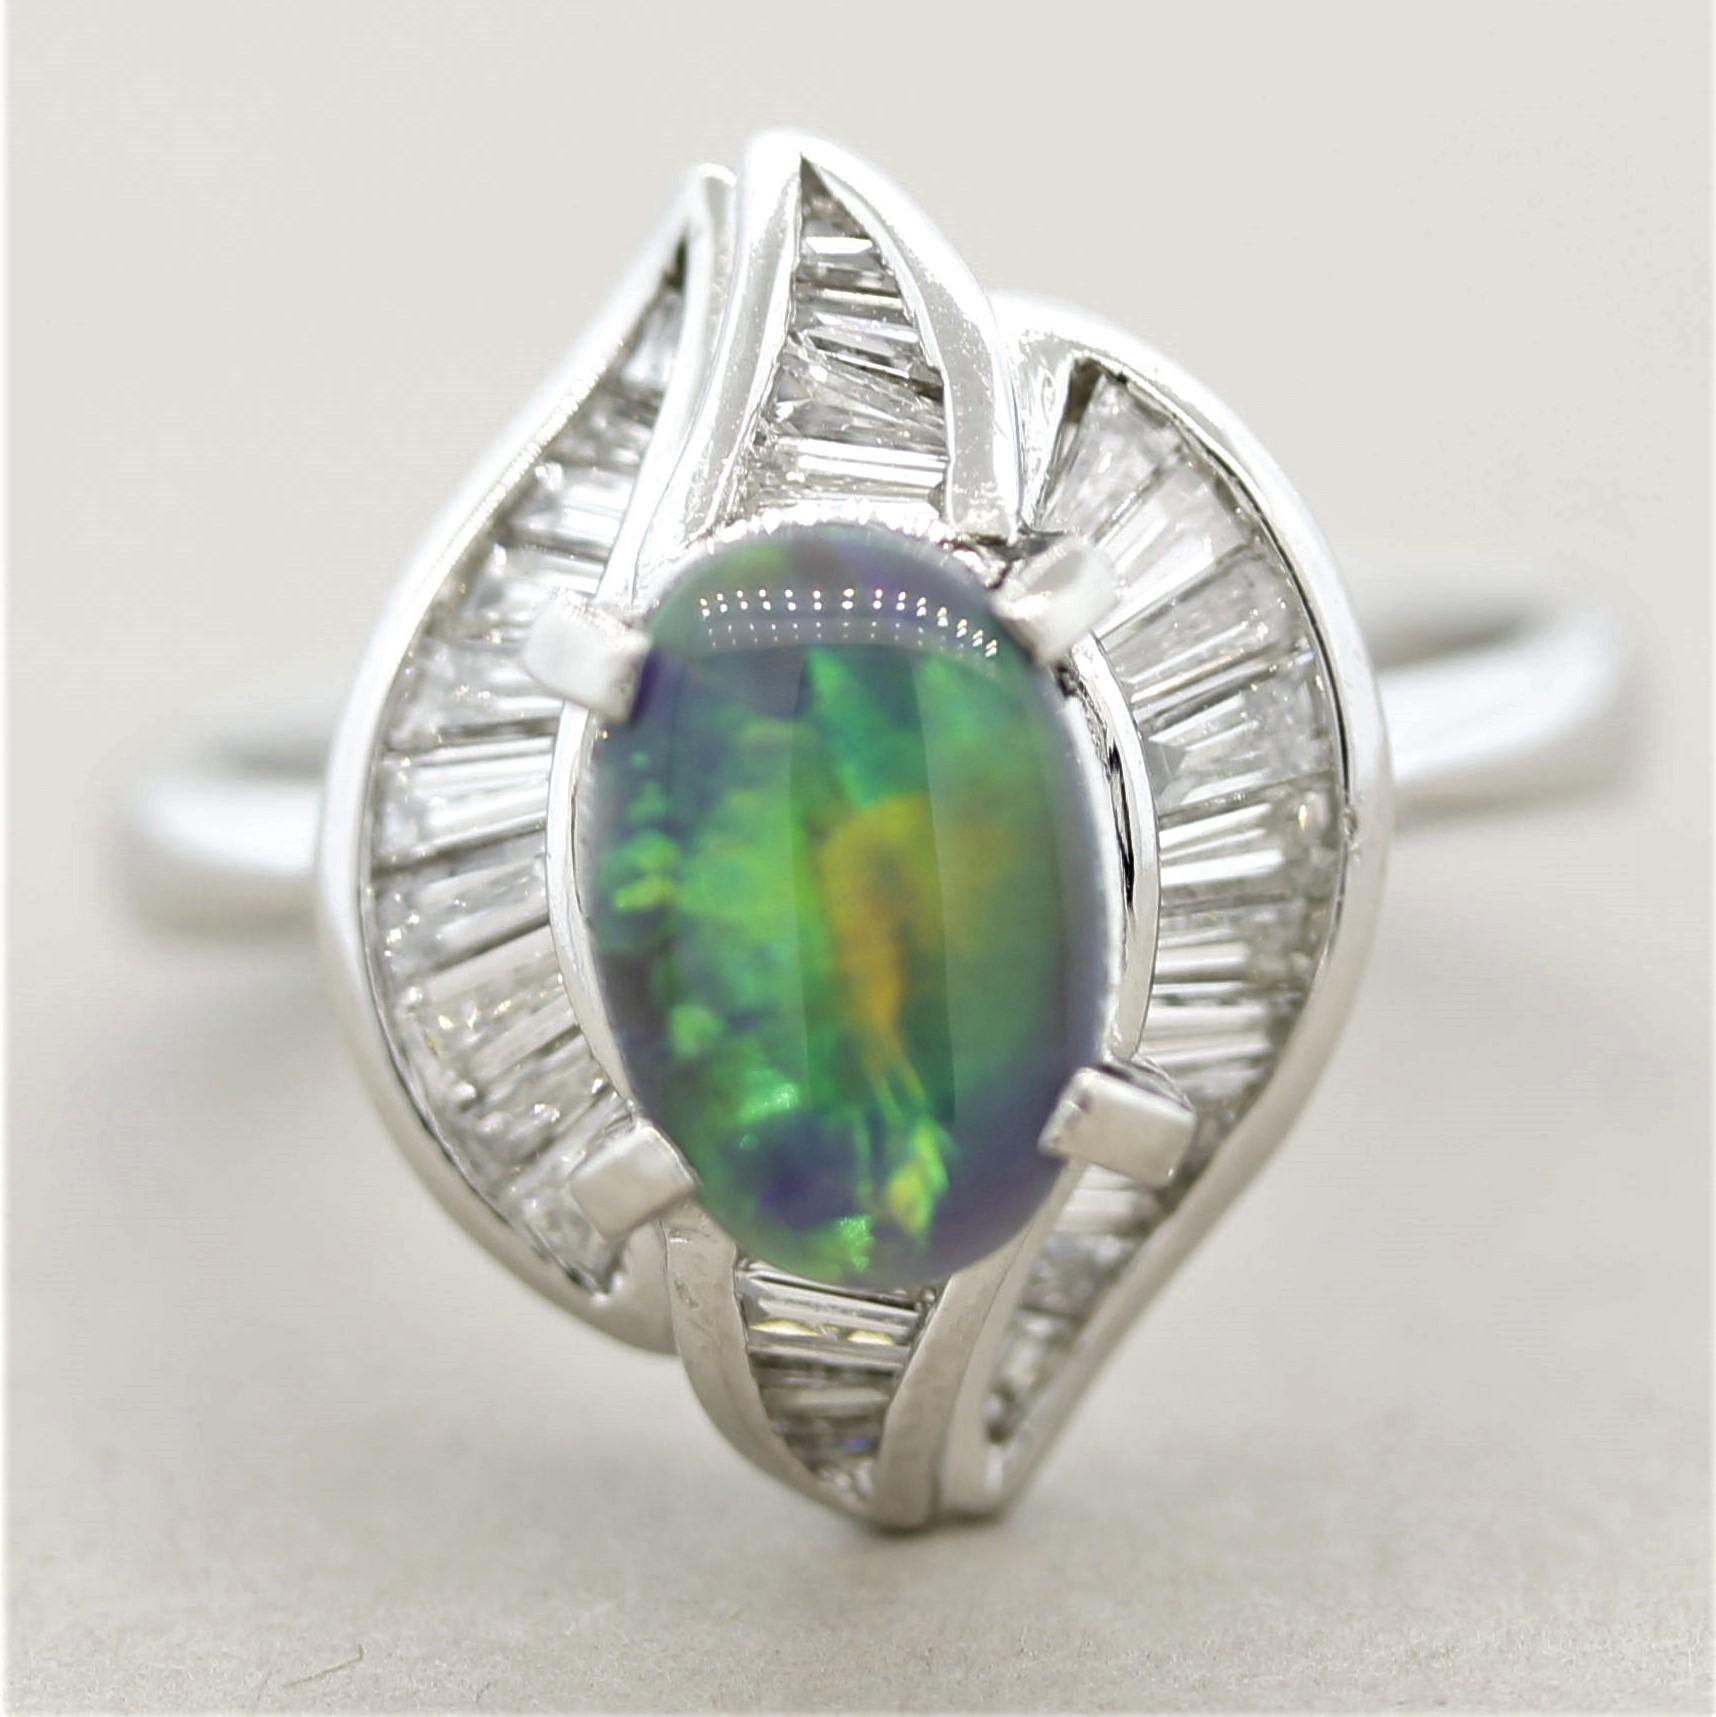 A modern styled platinum ring featuring a 1.15 carat Australian black opal with excellent play-of-color. Large and bright flashes of green, yellow and some blues can be seen across the entirety of this small but gem opal. Accenting the opal are 0.93